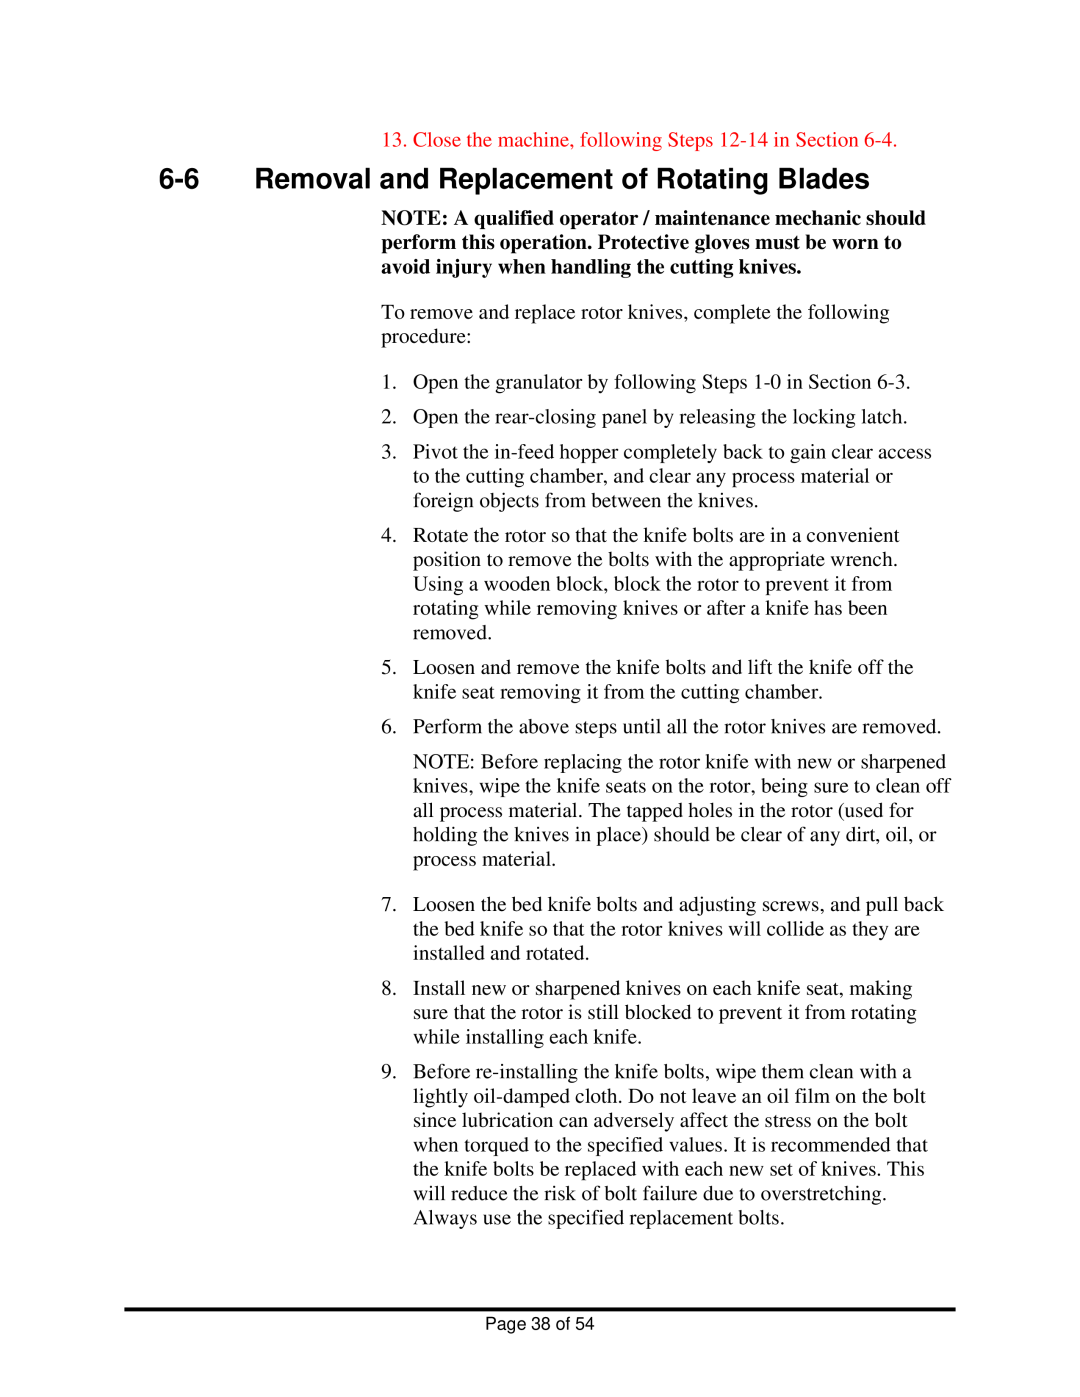 Sterling BP810, BP814, BP818 manual 6-6Removal and Replacement of Rotating Blades, Page 38 of 